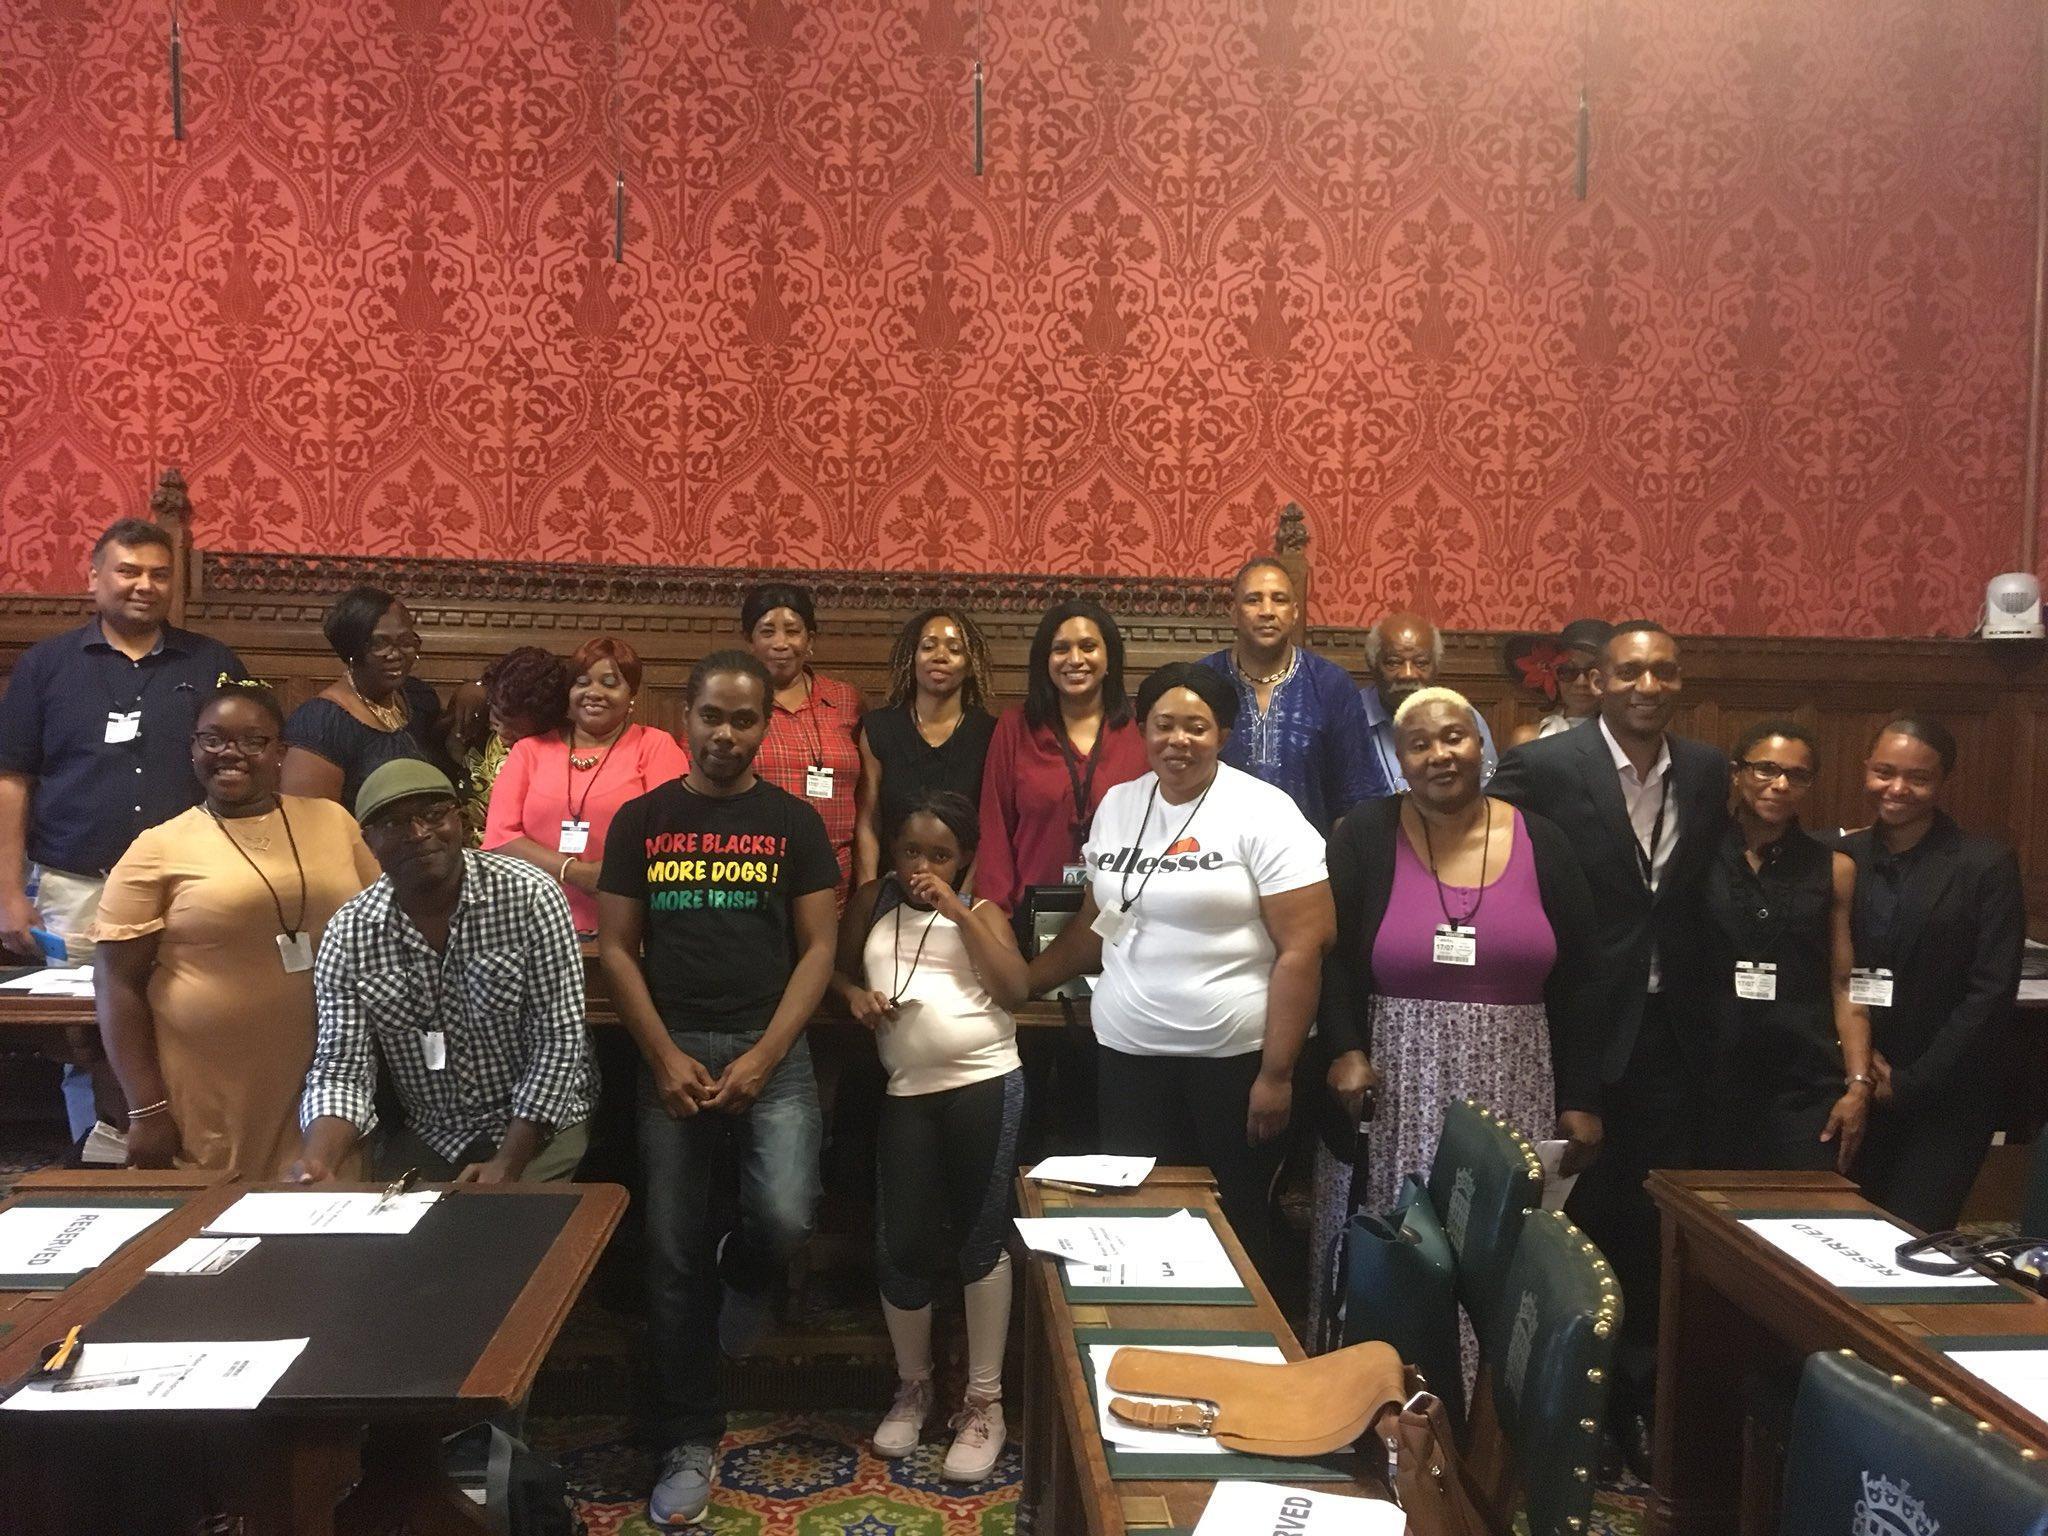 Windrush descendants who attended the event in parliament spoke out about their experience of being detained and threatened with deportation despite having been in Britain for many years, and all of their family being in the country.